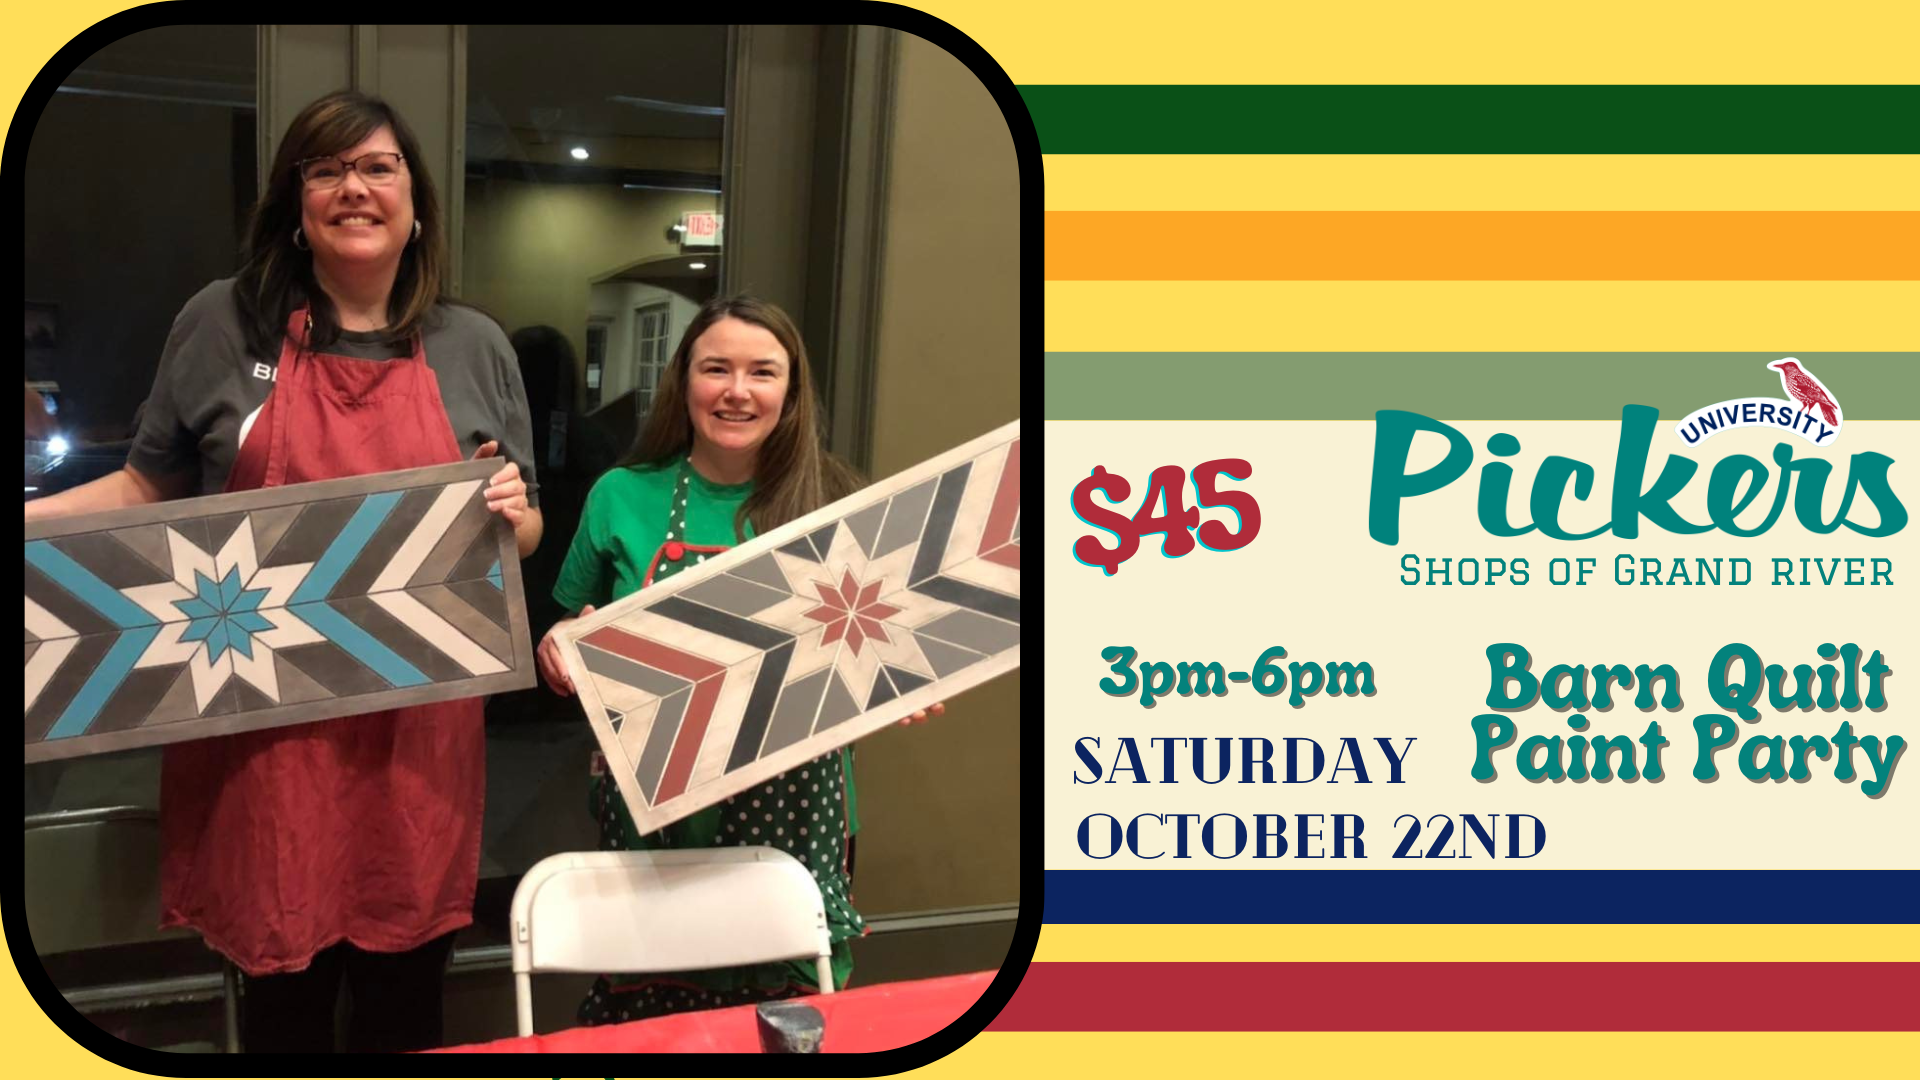 FB Event Cover 2022 9 1 Ywkbrf.tmp Barn Quilt Painting Class